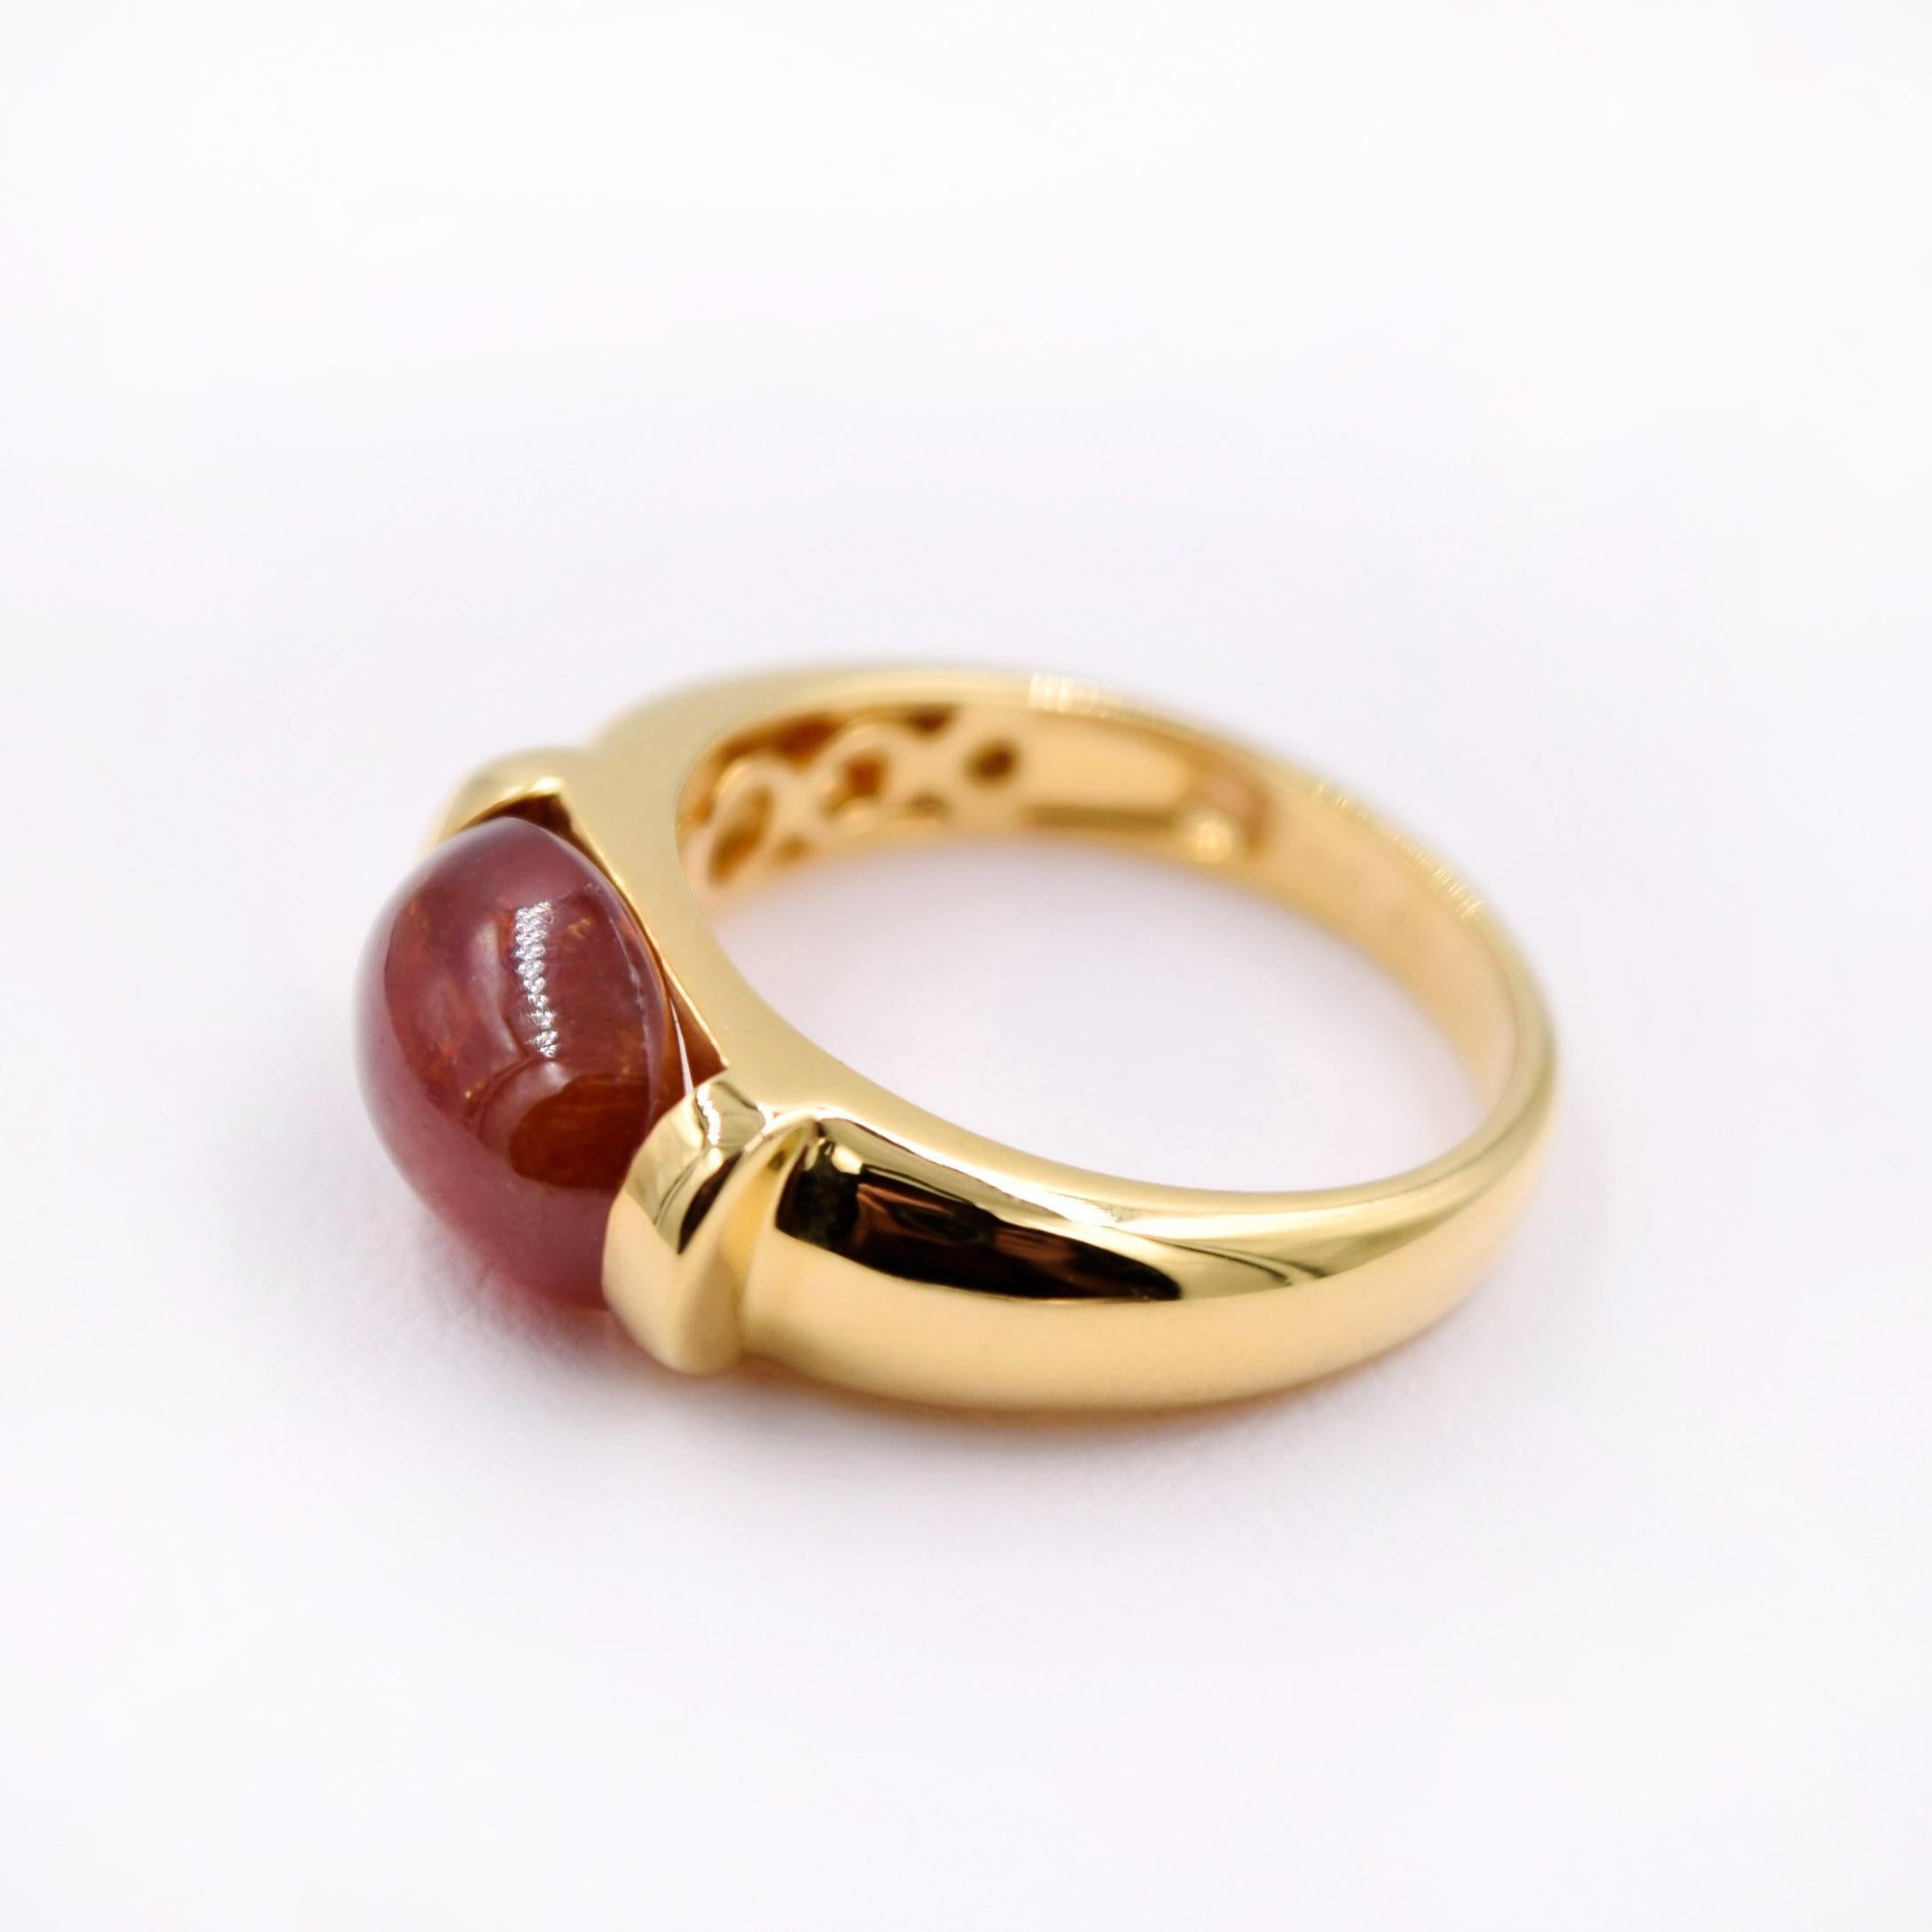 Kanwar Creations Spessartite Ring in 18 Karat Yellow Gold In New Condition For Sale In Mill Valley, CA